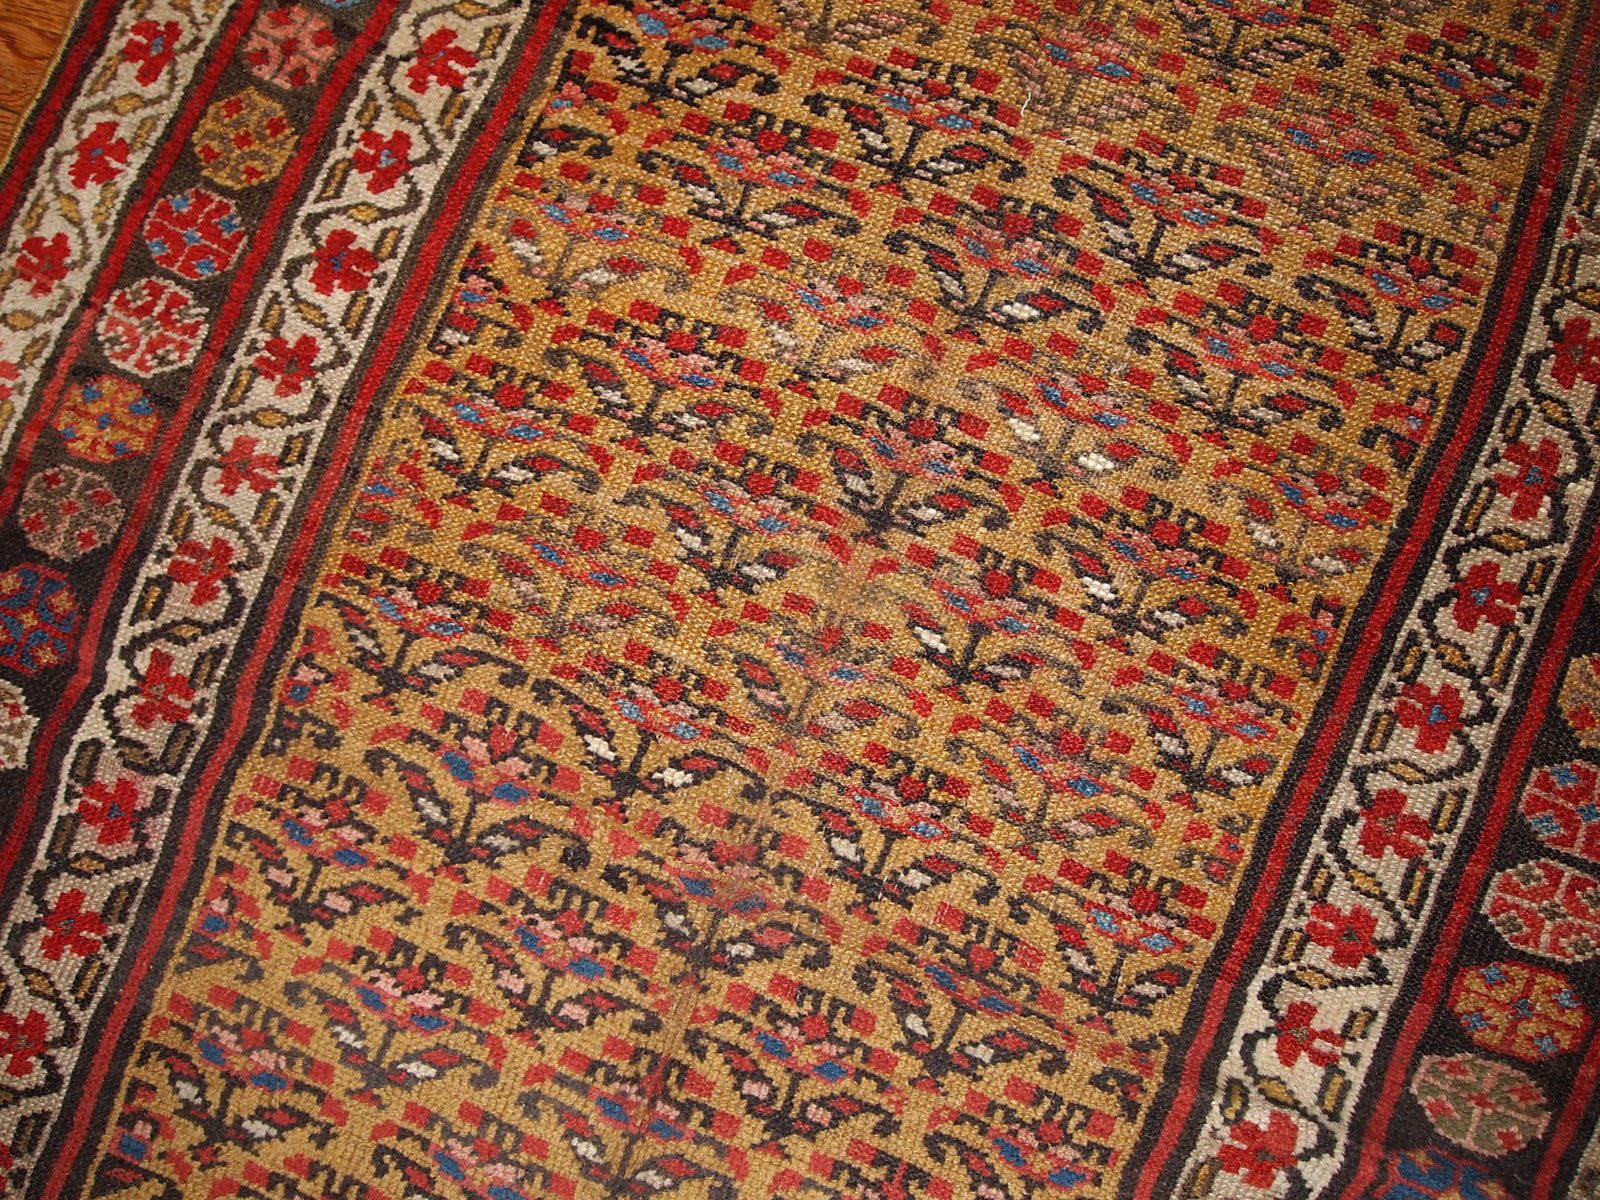 Antique Persian Kurdish rug in yellow, white and red  colors. The rug is from the end of 19th century, in good condition.